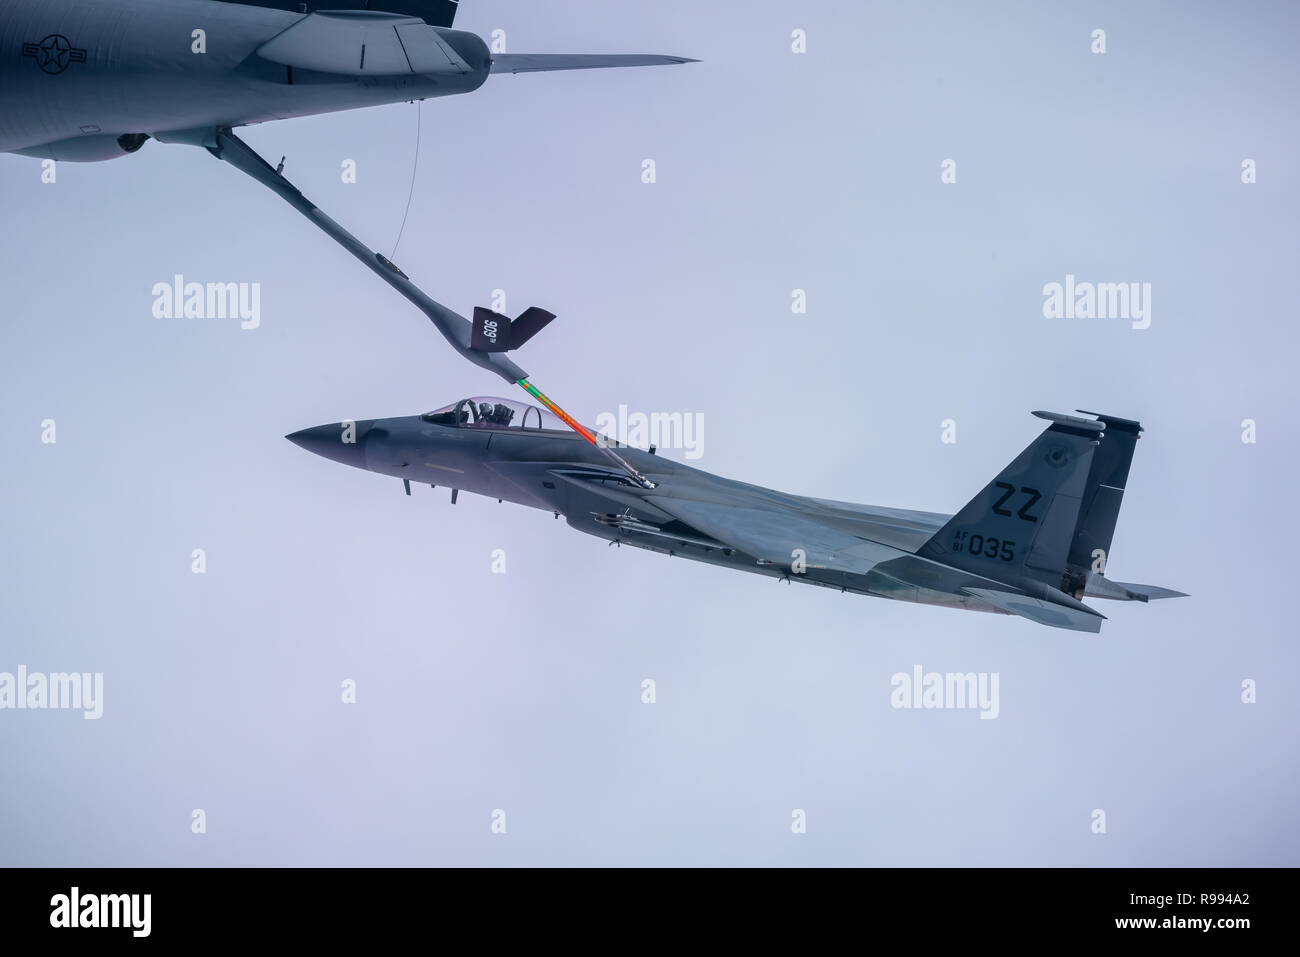 A KC-135 Stratotanker boom extends and refuels an F-15C Eagle over the East China Sea Dec. 11, 2018.  The 909th Air Refueling Squadron helps ensure a free and open Indo-Pacific by providing air refueling to U.S., allies and partners within the area of responsibility.  (U.S. Air Force photo by Airman 1st Class Matthew Seefeldt) Stock Photo